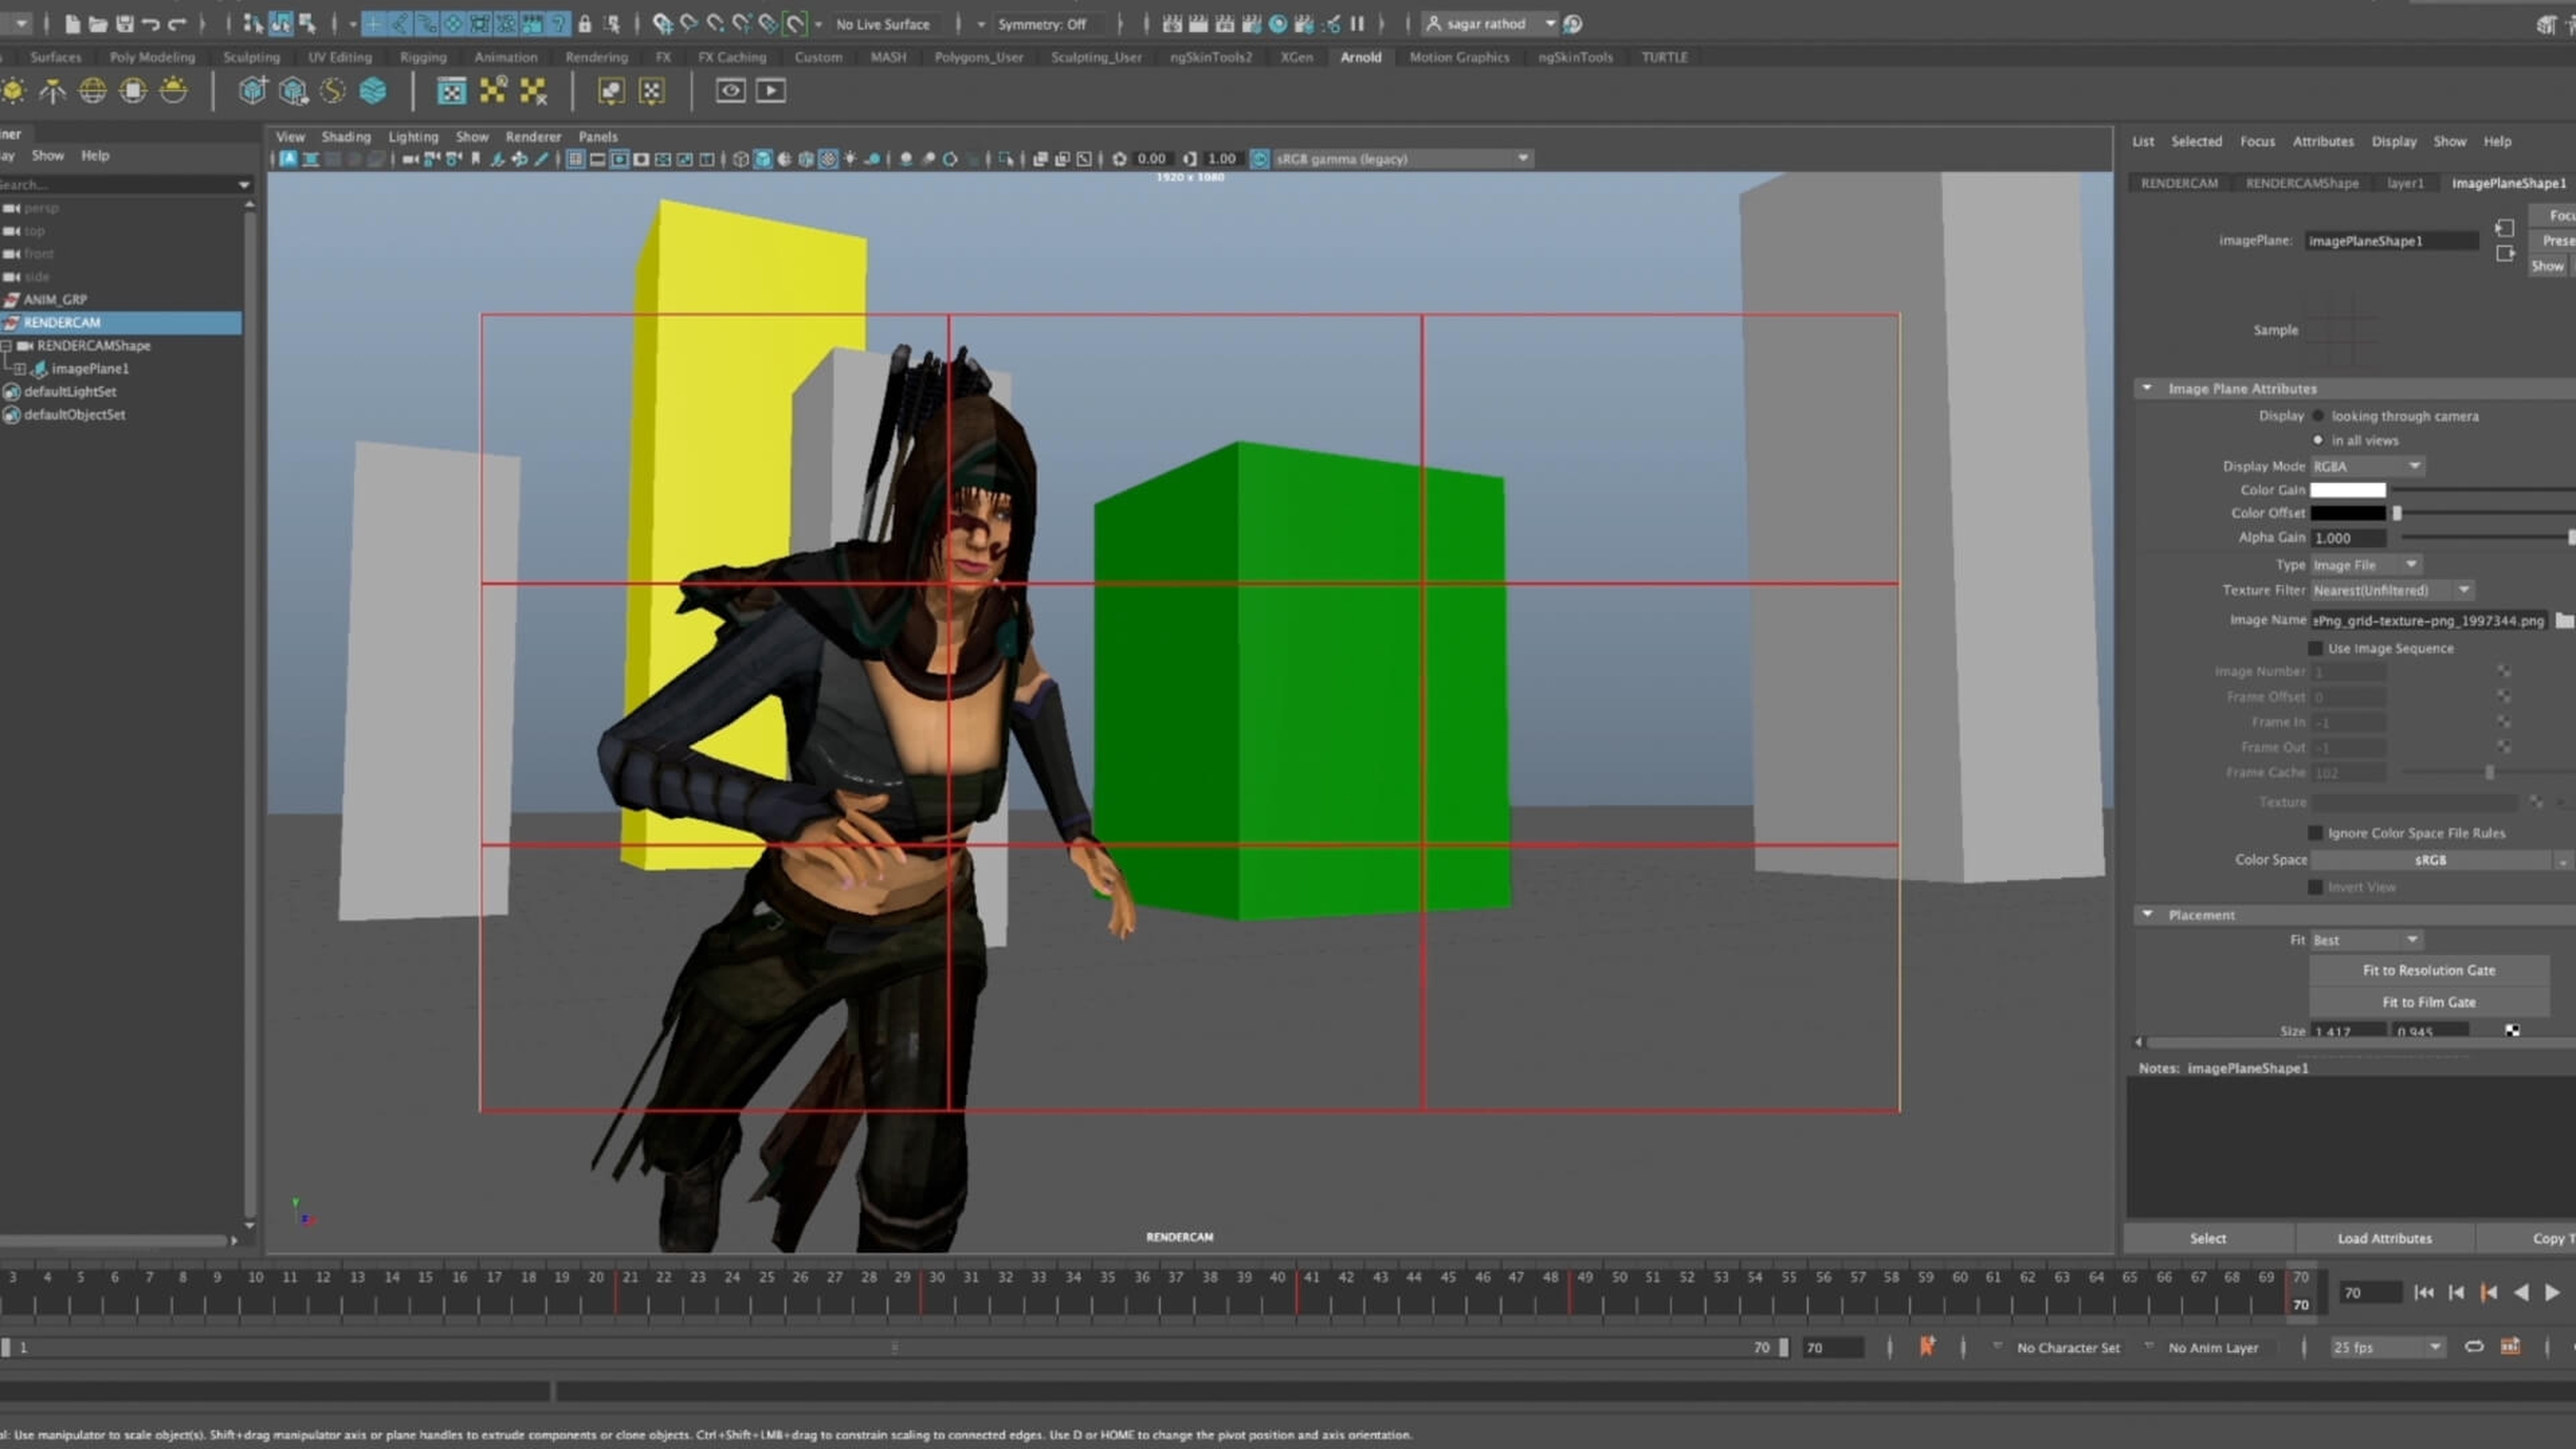 An animation of a woman running in Maya, with a three by three grid overlaid to demonstrate the rule of thirds